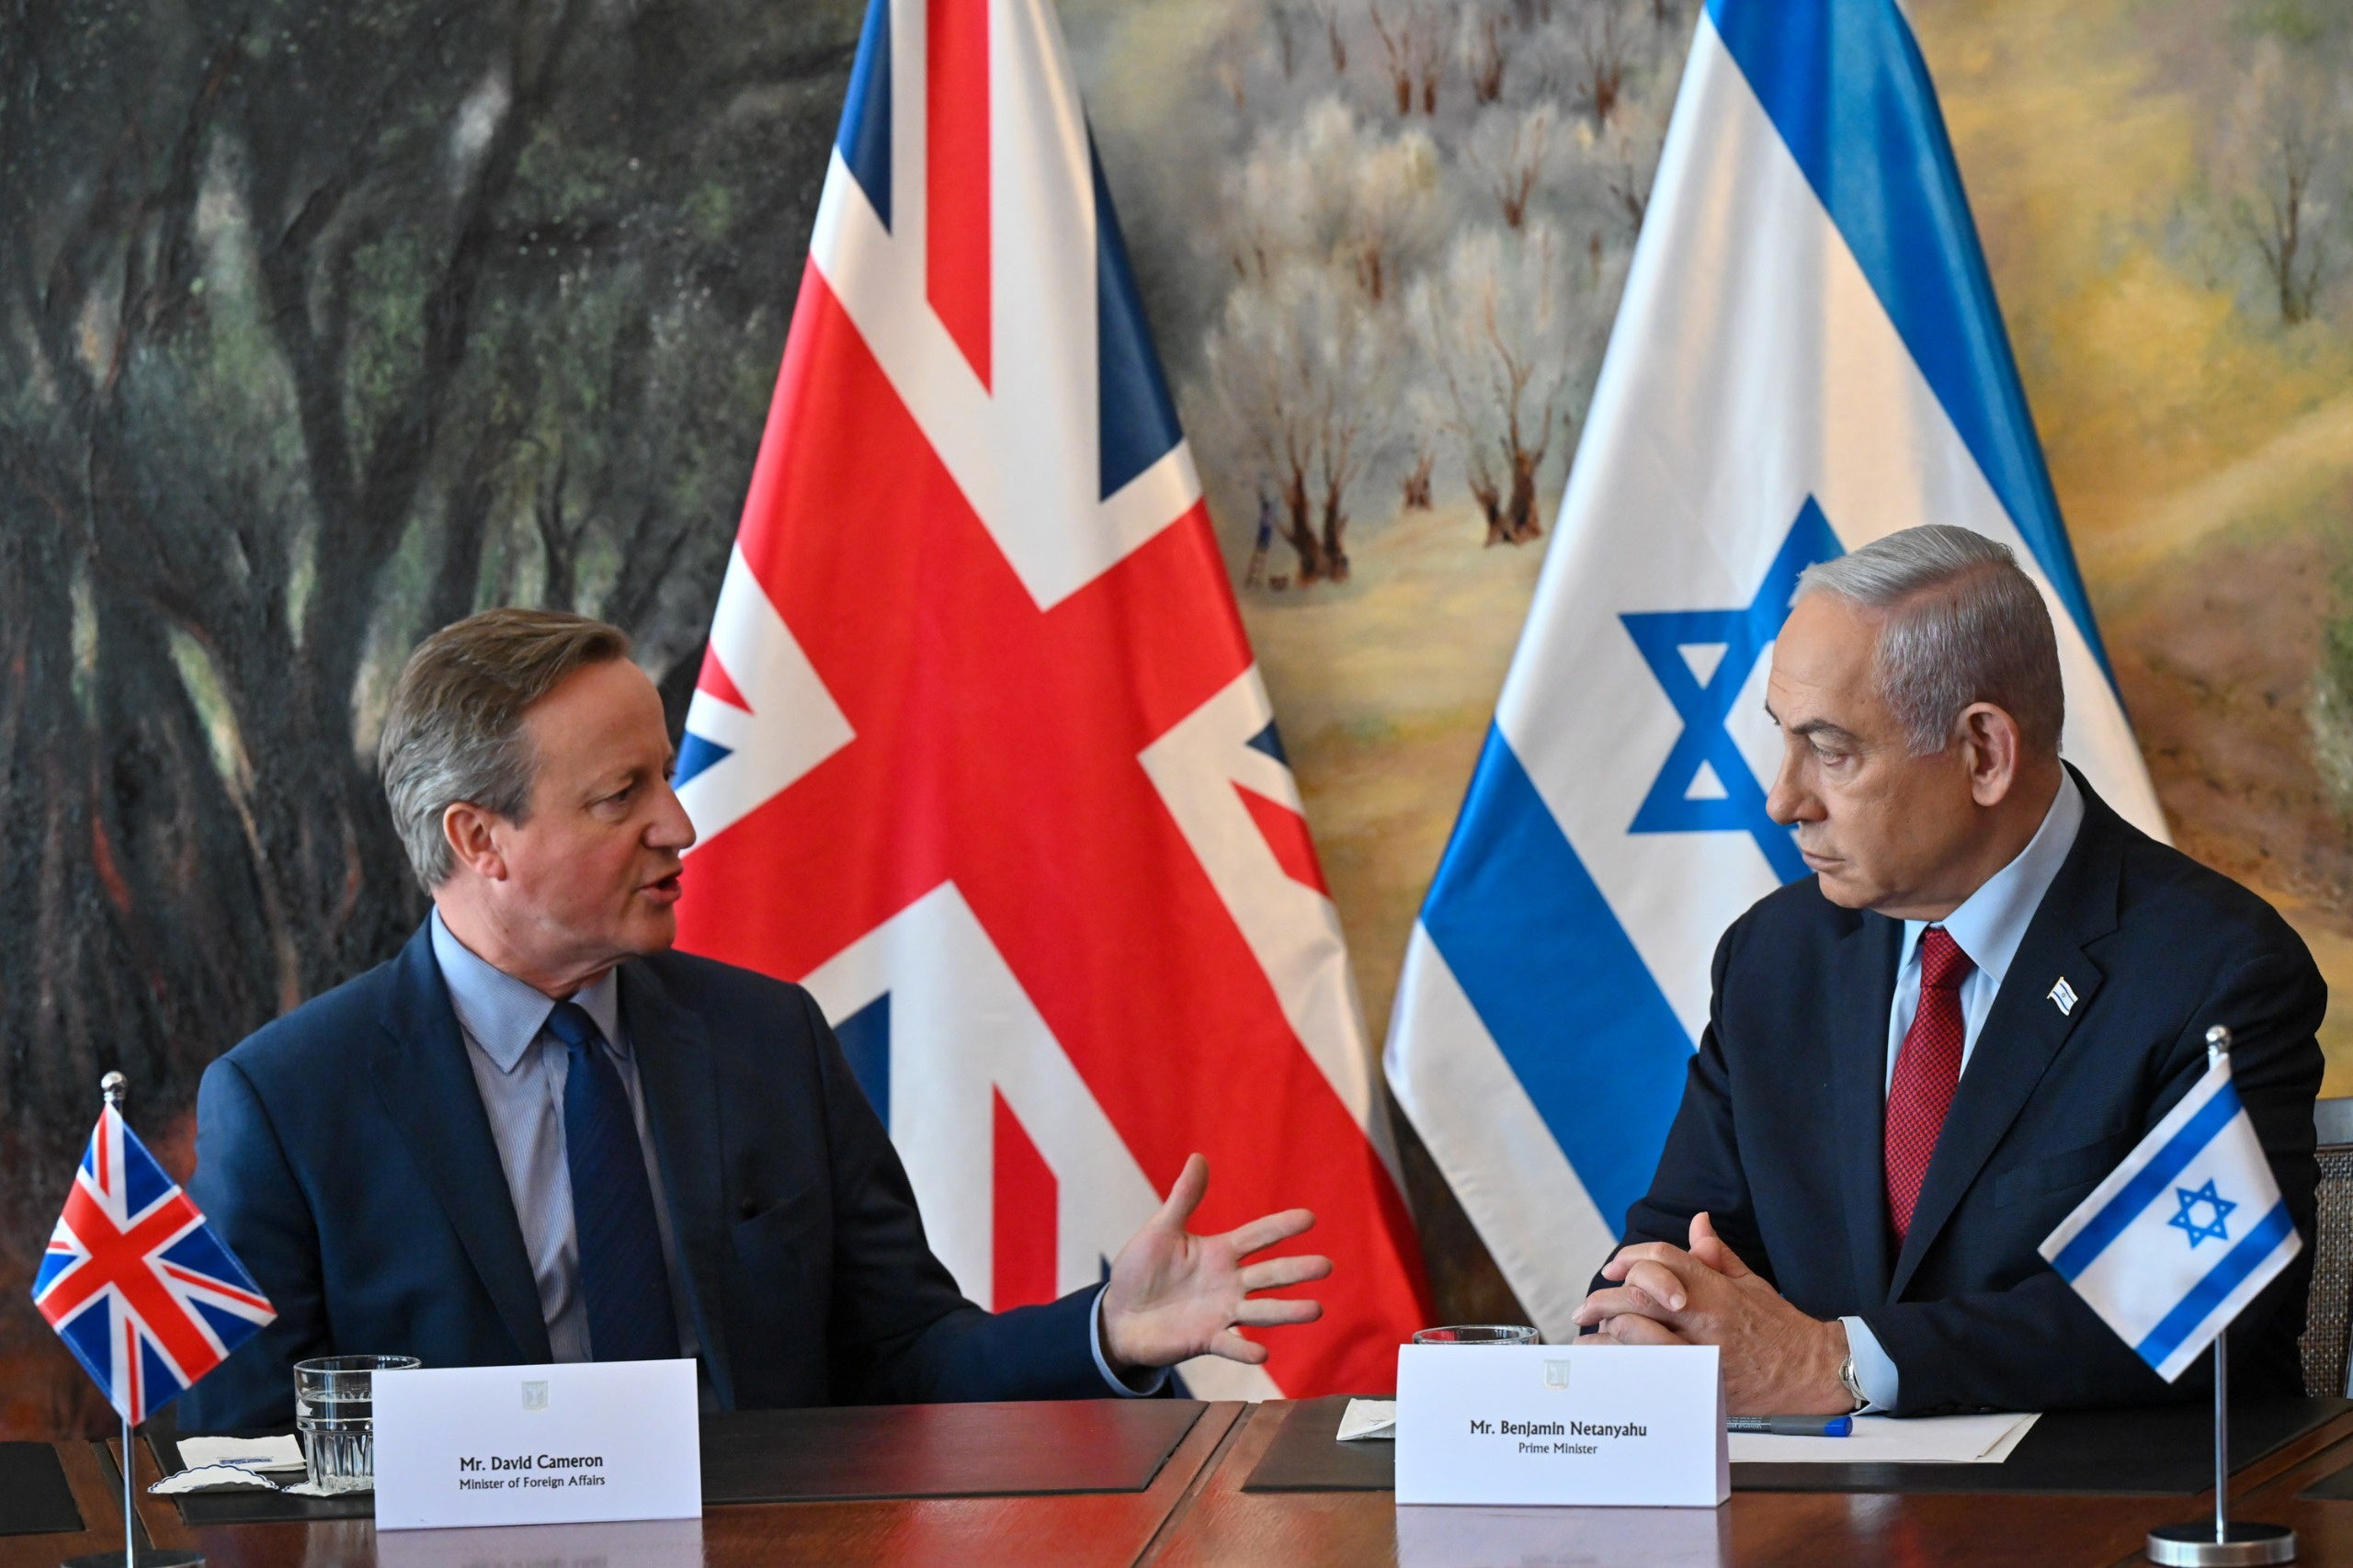 Cameron has pushed Netanyahu to consider a two-state solution